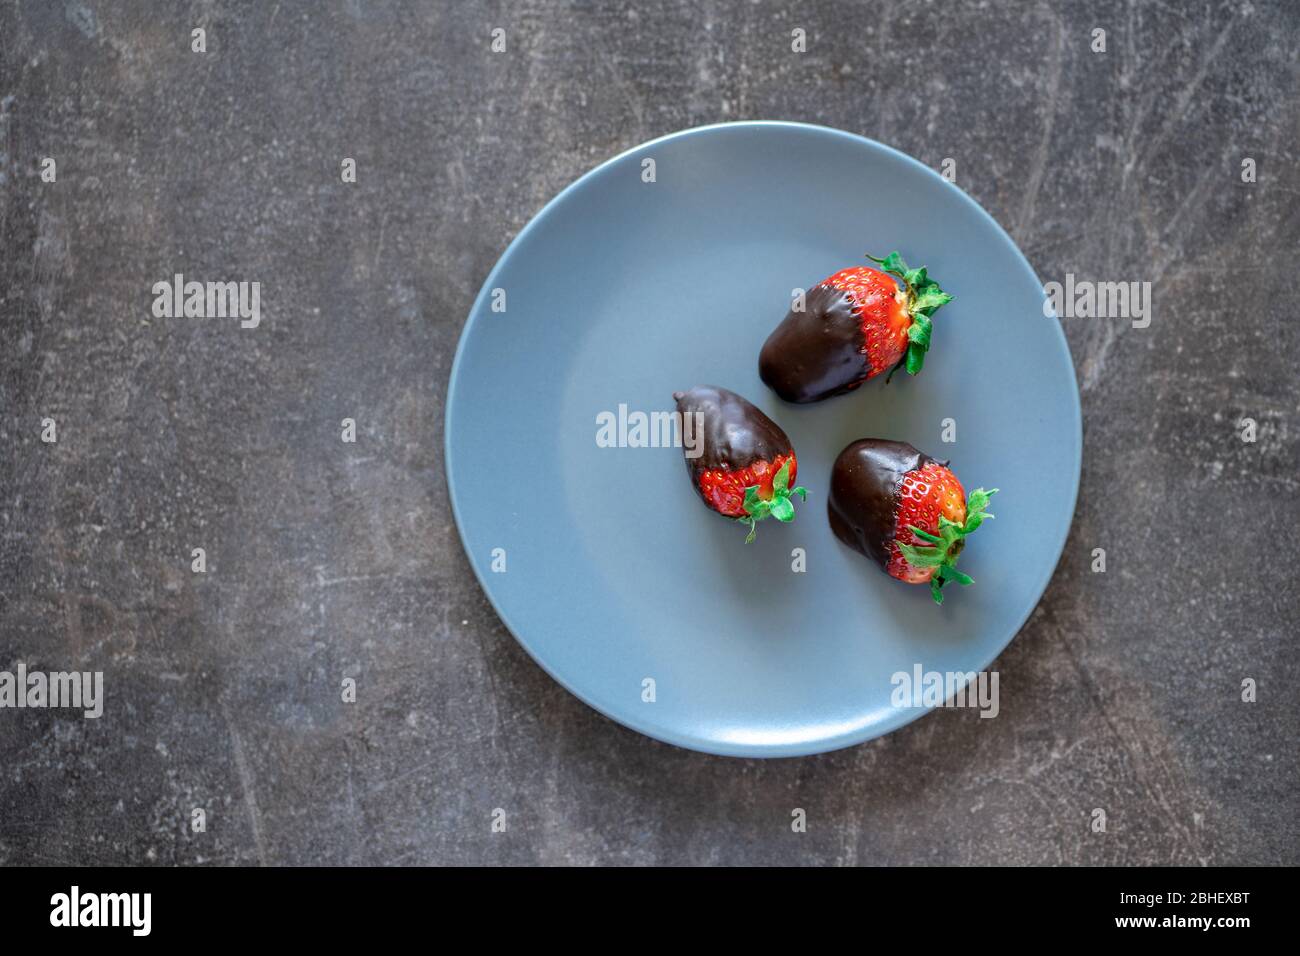 Top view of fresh healthy strawberries dipped in dark chocolate on a blue plate Stock Photo